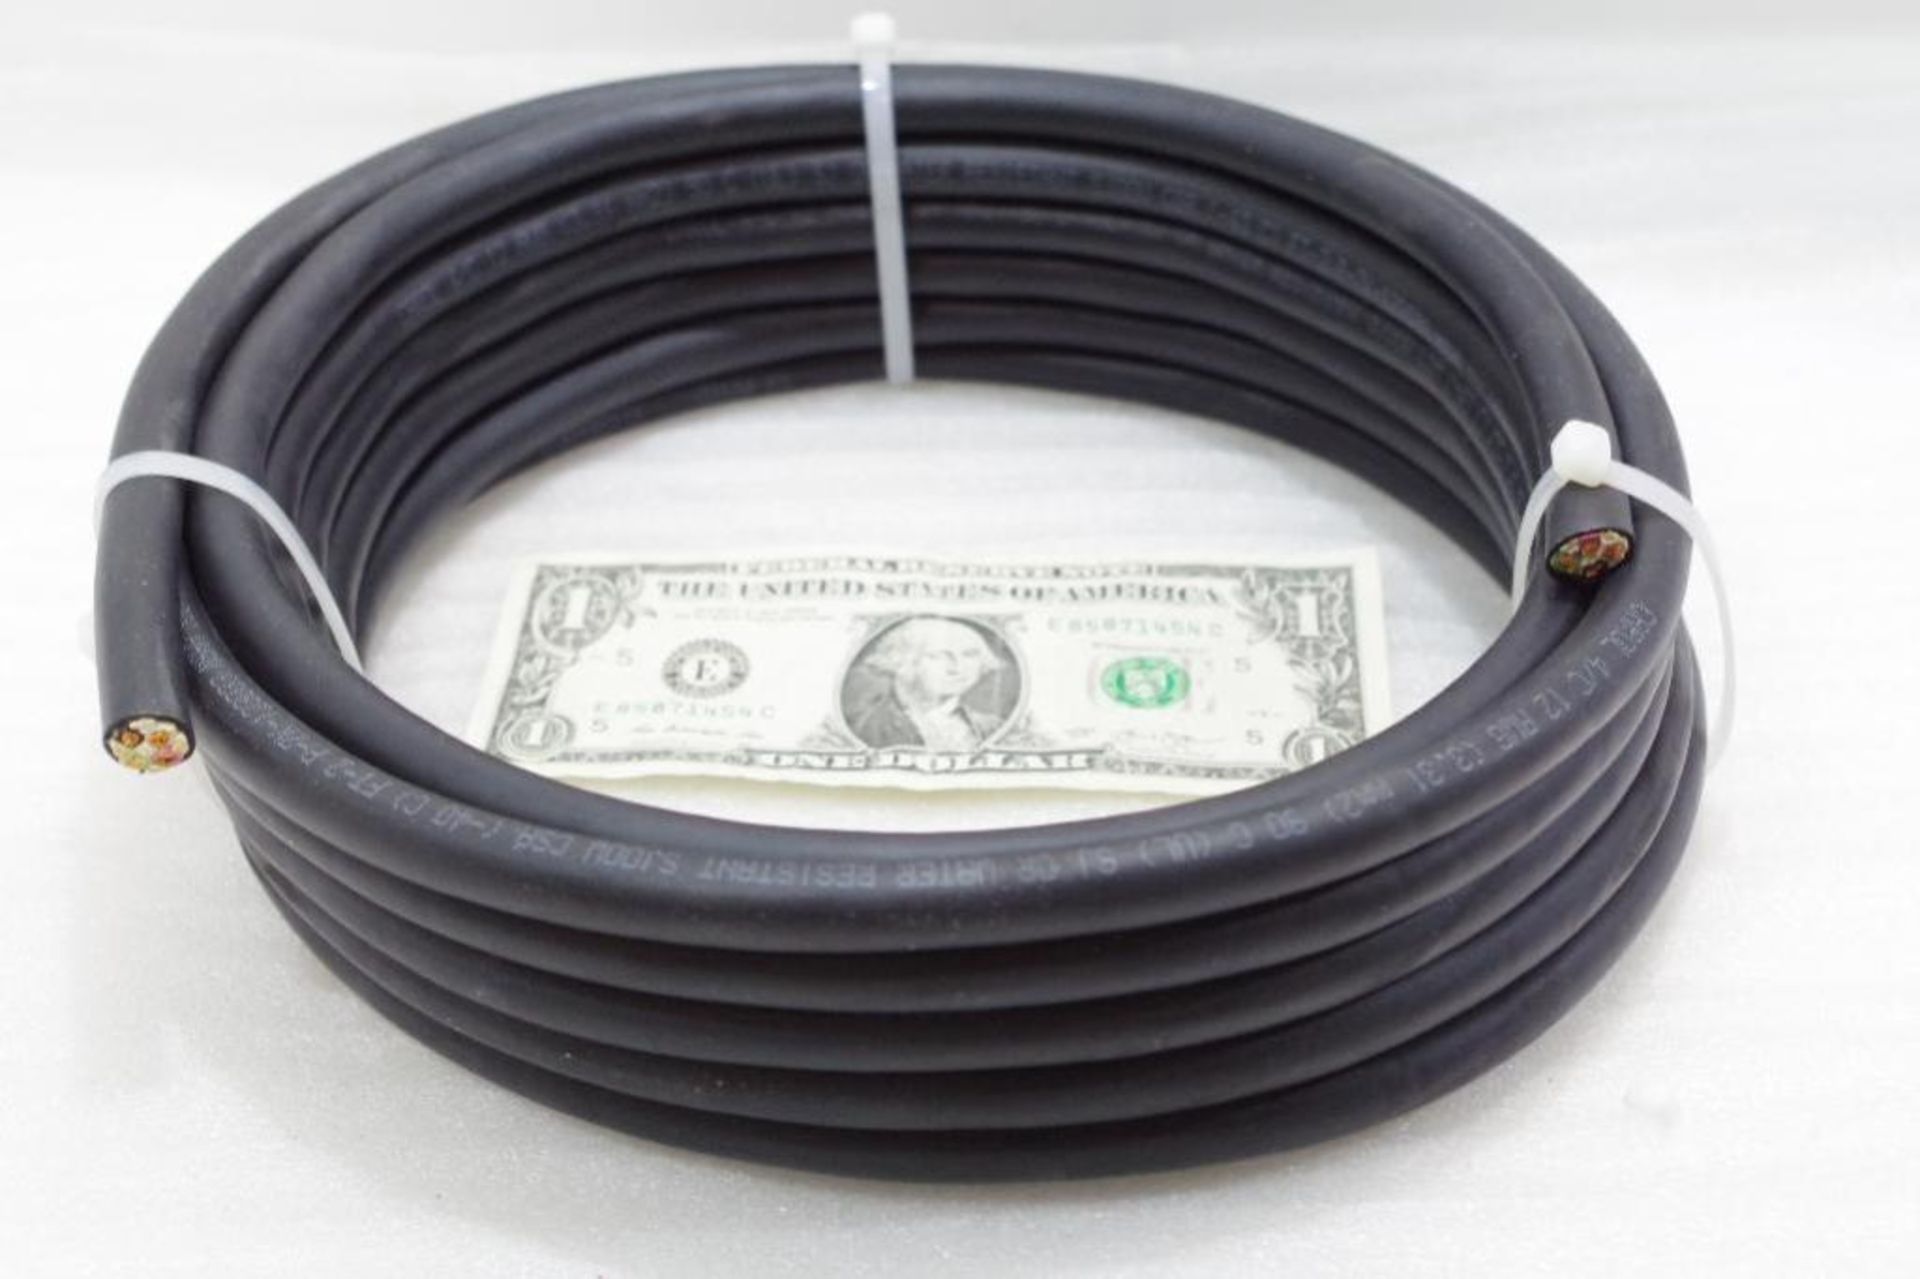 NEW CAROL 25 ft. Portable Cord; Conductors: 4, Wire Size: 12 AWG, Jacket Type: SJOOW, M/N 01381 - Image 2 of 5